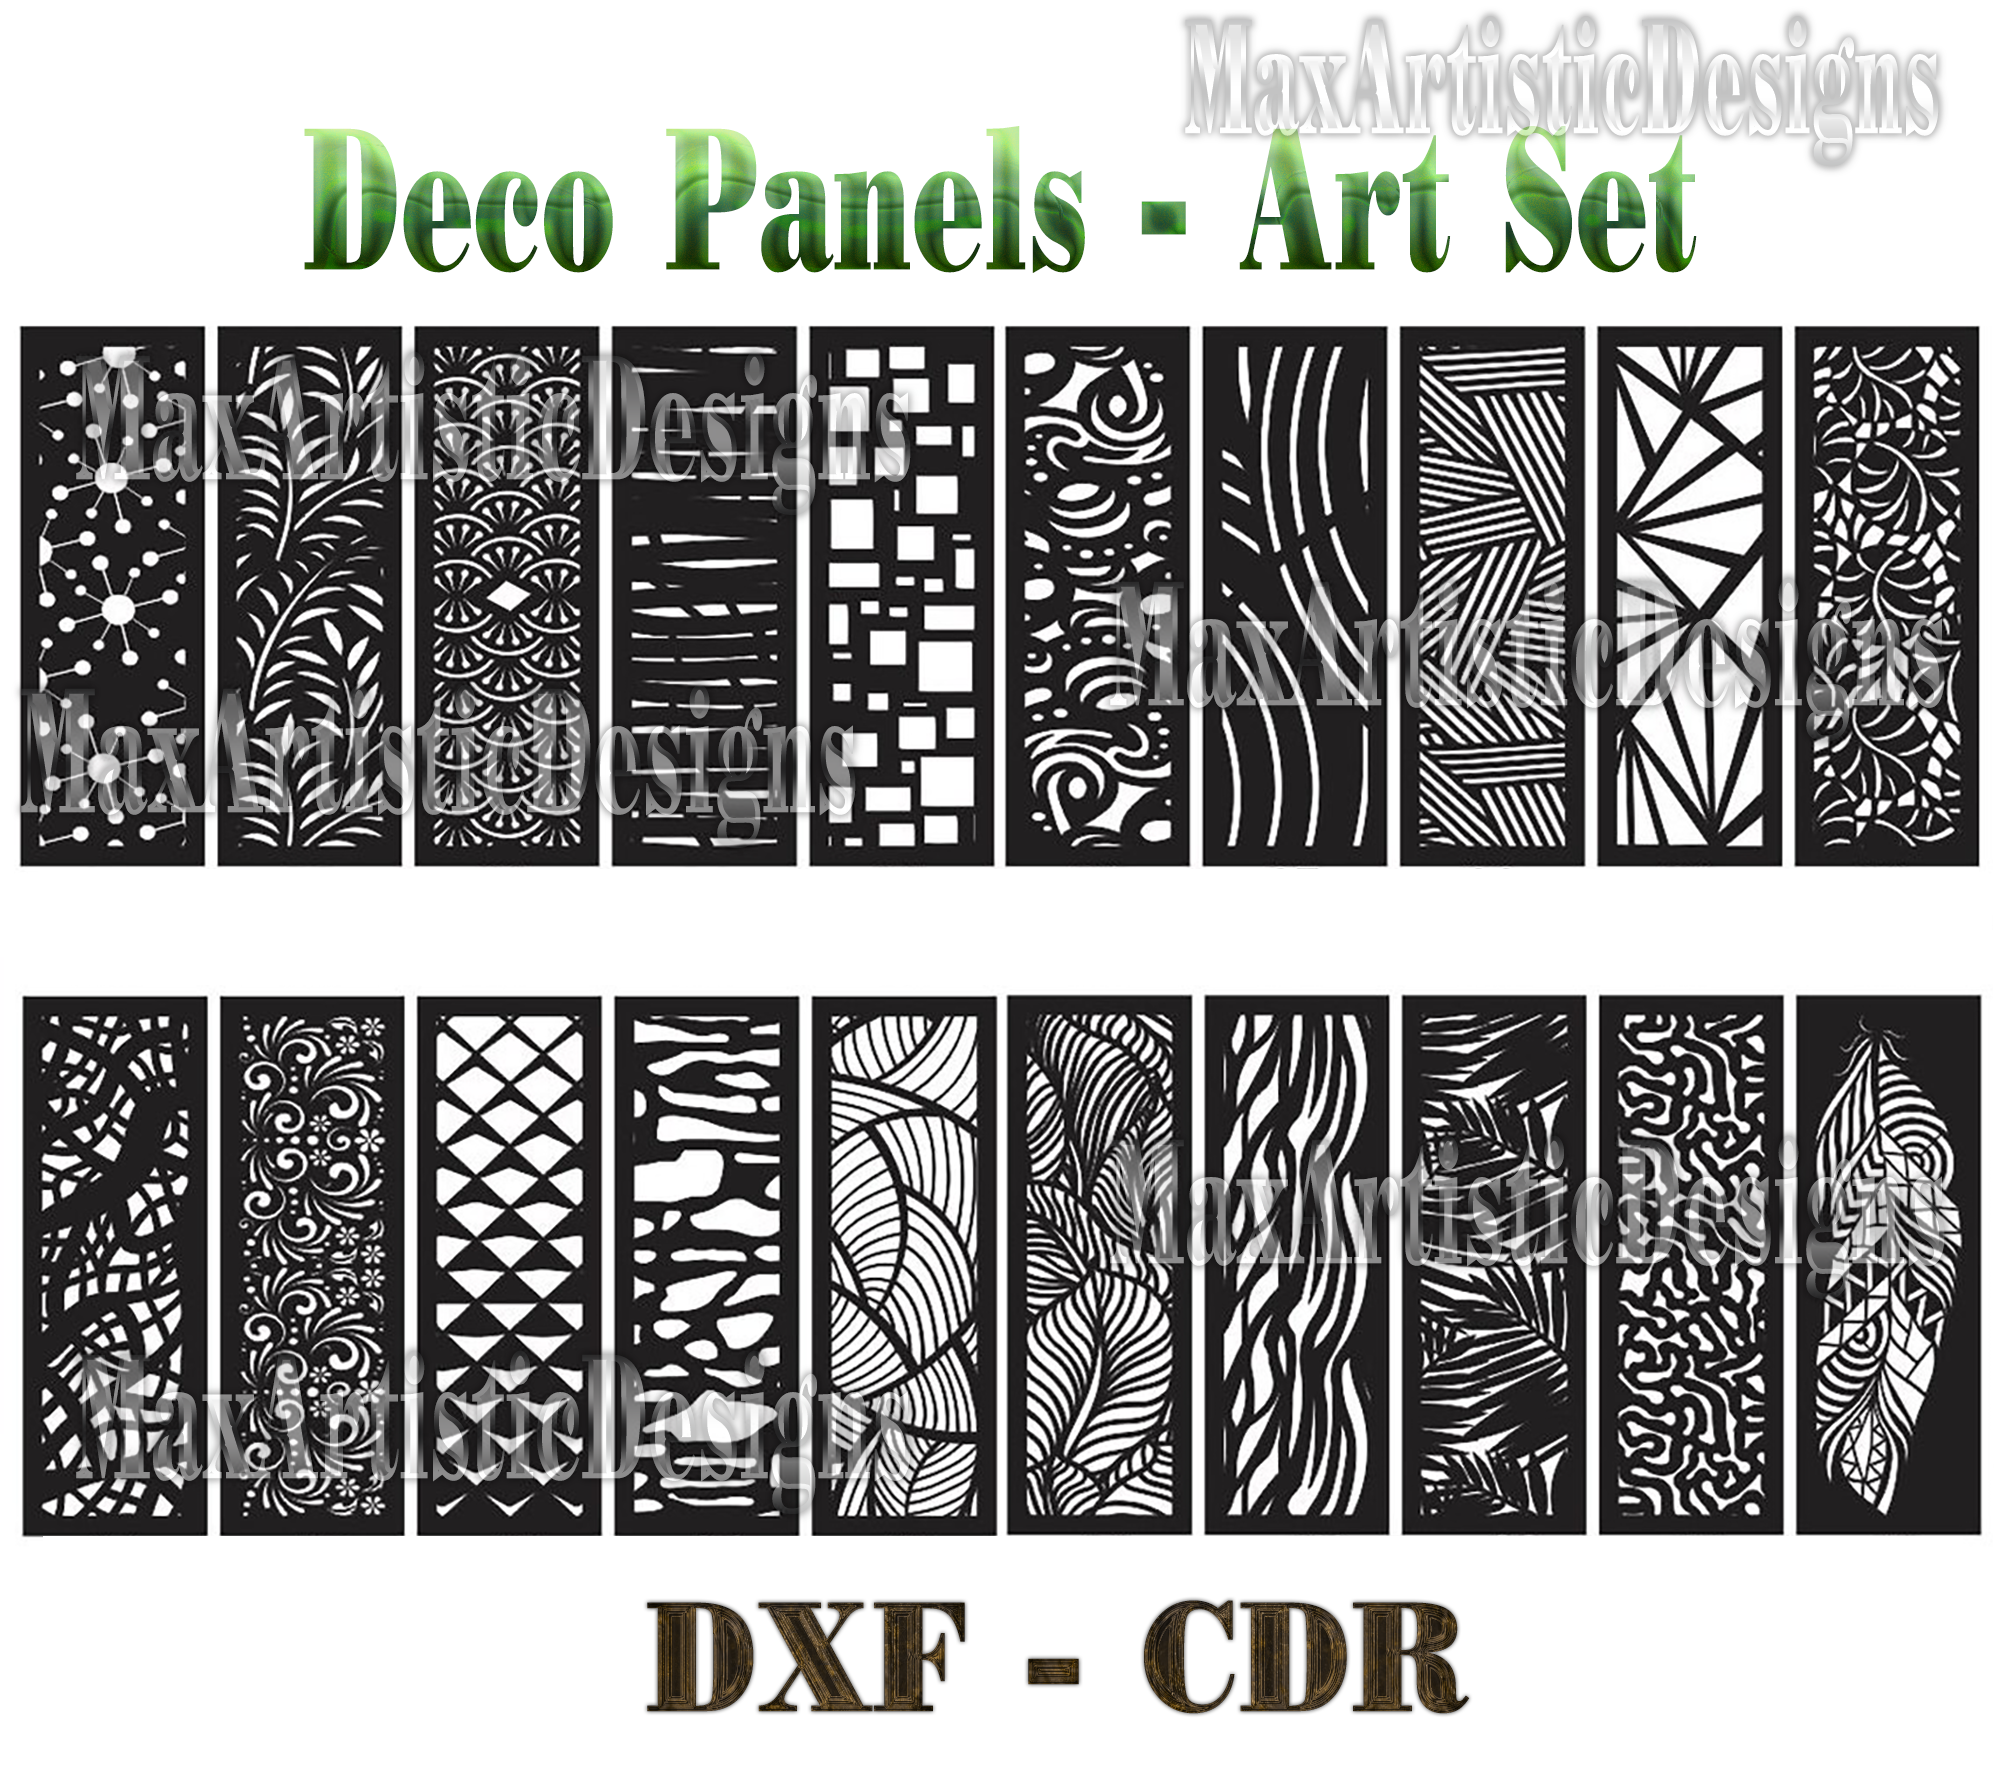 19+ dxf cdr vector panels “gemotrical abstract” and plant frames art cut files tested cnc for plasma laser & router cut download